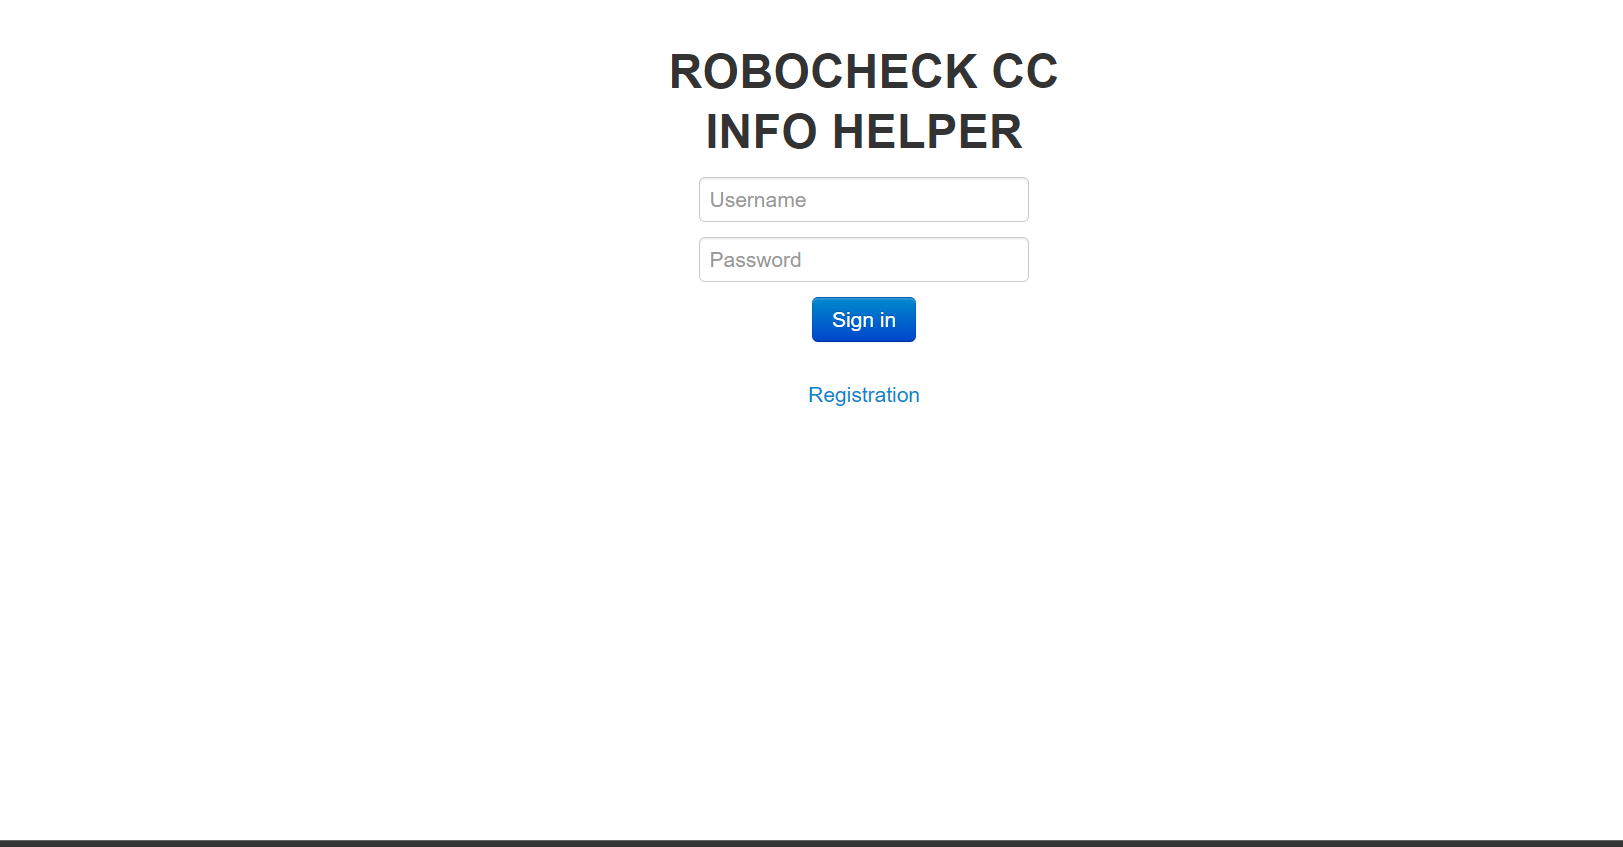 Robocheck|Free Find Social Security Number without login 2022 - Latest News - ConclusiveNews.Com